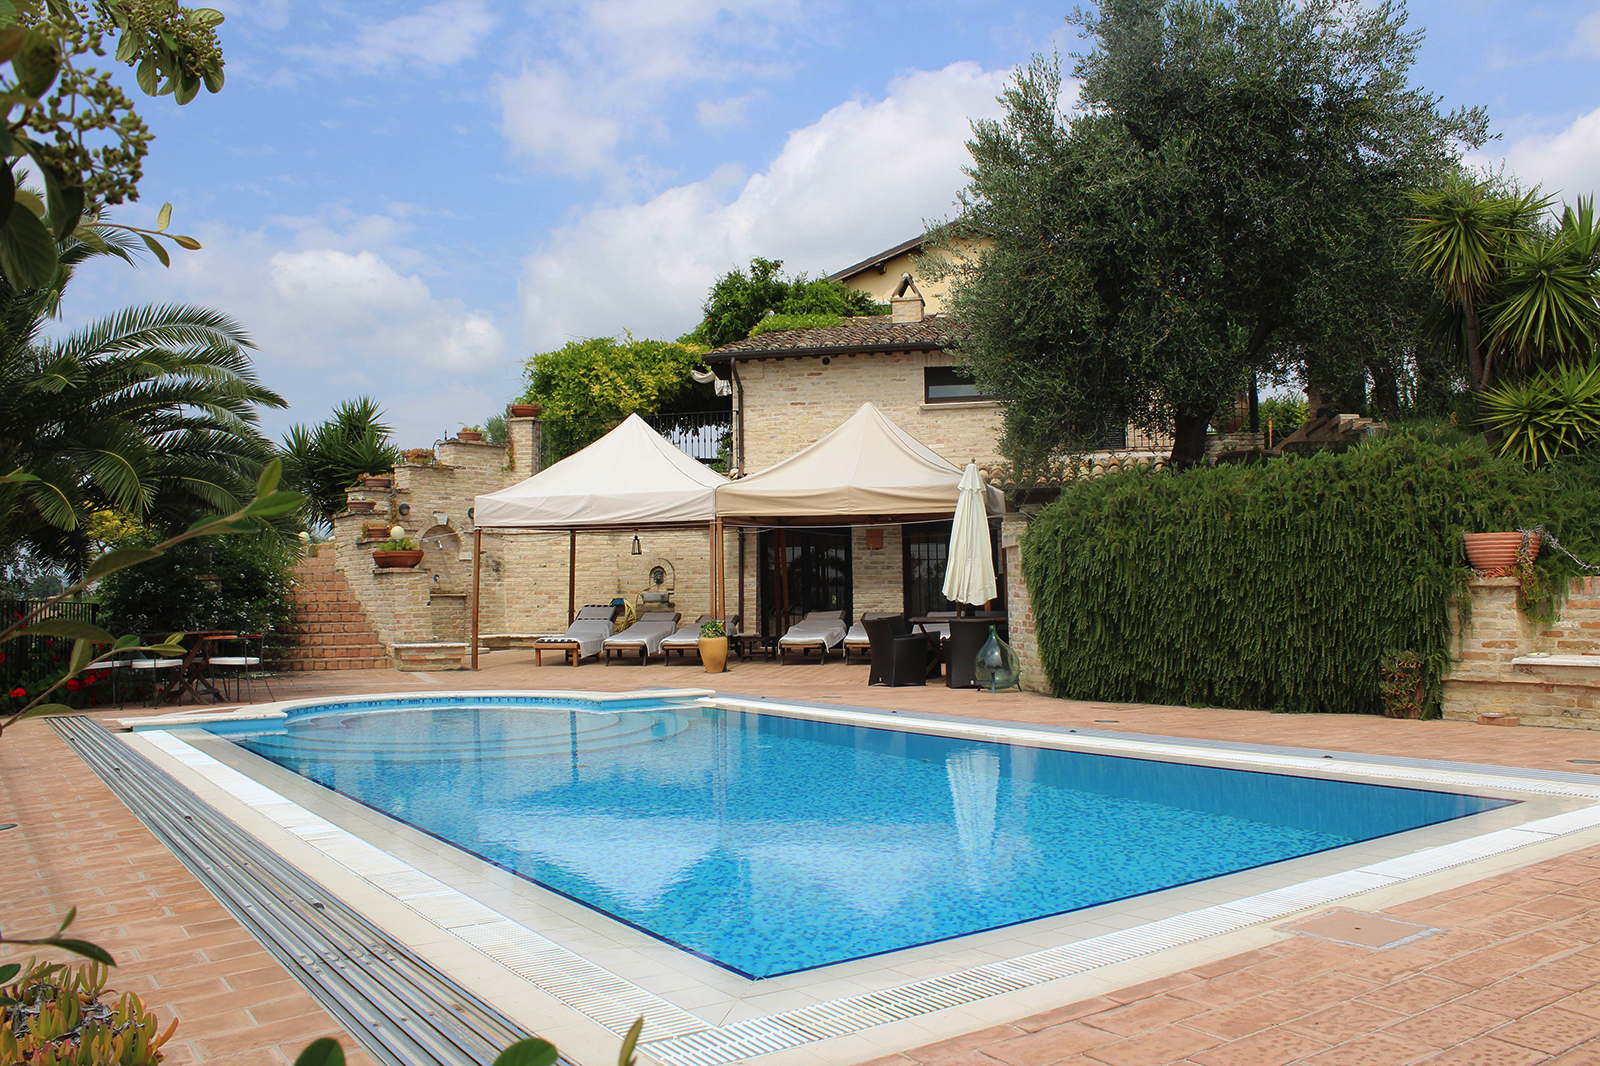 Villa for holiday rental with pool close to beach Marche Italy 